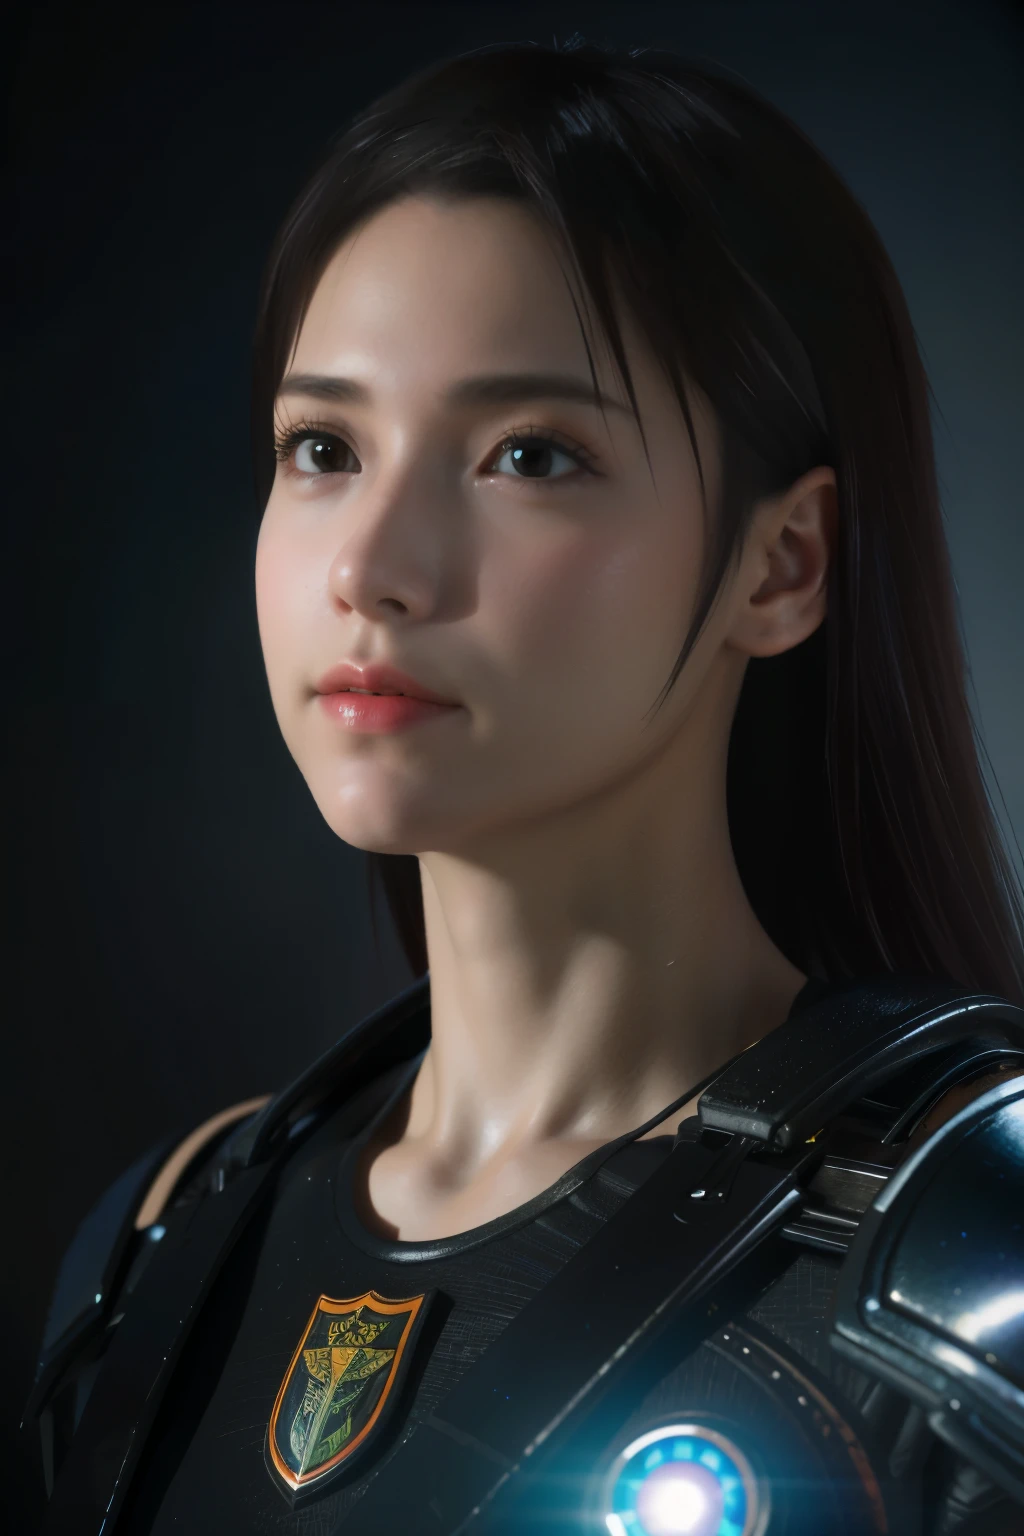 Game art，The best picture quality，Highest resolution，8k，(A bust photograph)，(Portrait)，(Head close-up)，(Rule of thirds)，Unreal Engine 5 rendering works， (The Girl of the Future)，(Female Warrior)， 
20-year-old girl，An eye rich in detail，(Big breasts)，Elegant and noble，indifferent，brave，
（A futuristic combat suit with medieval style，A beautifully patterned badge，Joint Armor，Extremely rich detail of armor，Mysterious light），Sci-fi characters，Warrior，

Photo poses，Simple background，Movie lights，Ray tracing，Game CG，((3D Unreal Engine))，oc rendering reflection pattern